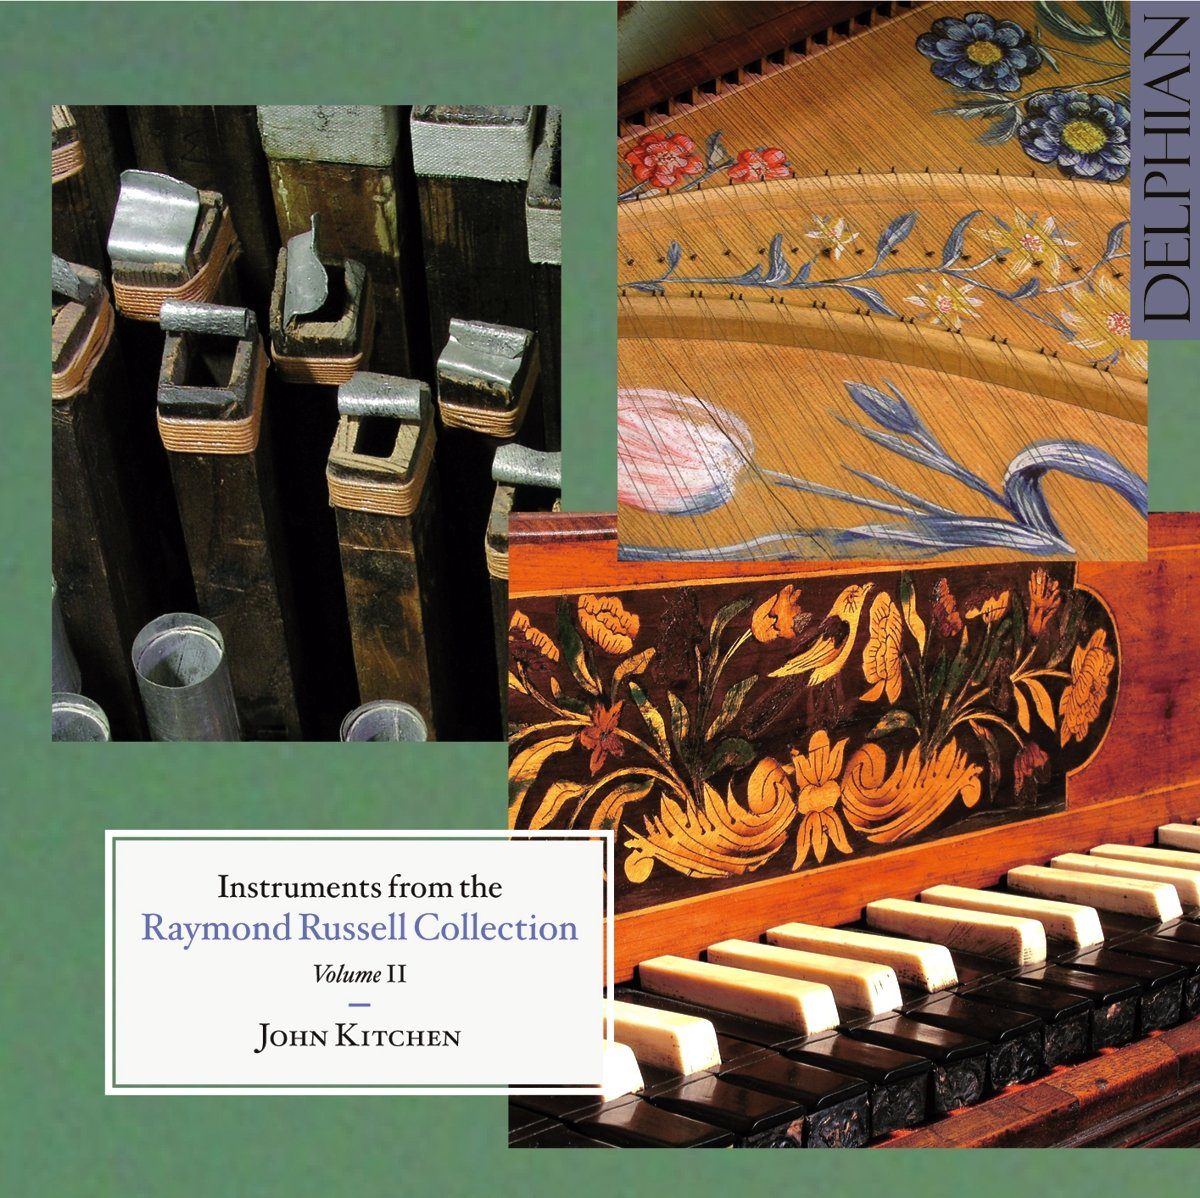 Instruments from the Russell Collection Vol II CD Delphian Records